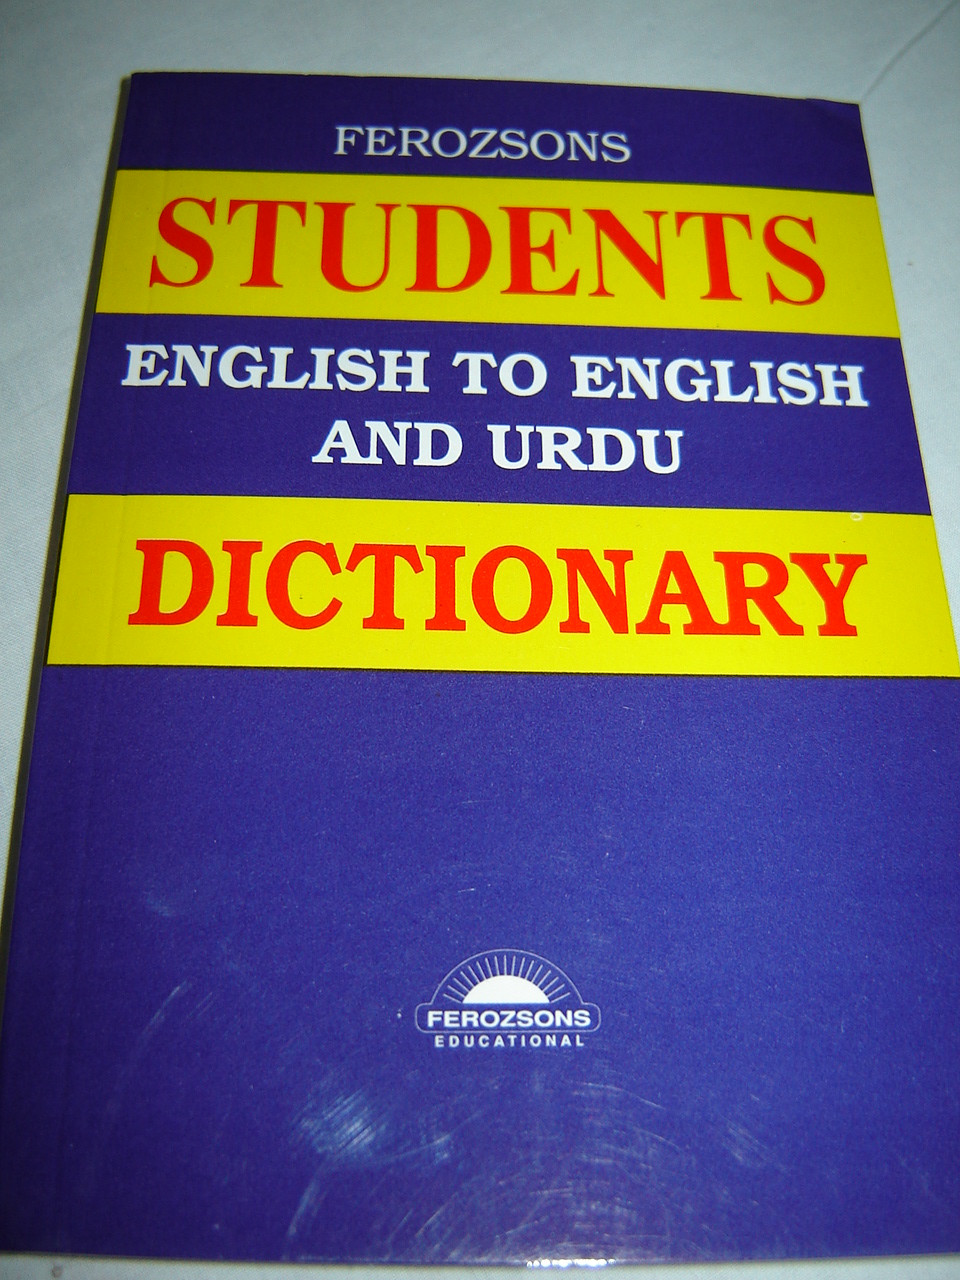 english to english and urdu dictionary by ferozsons